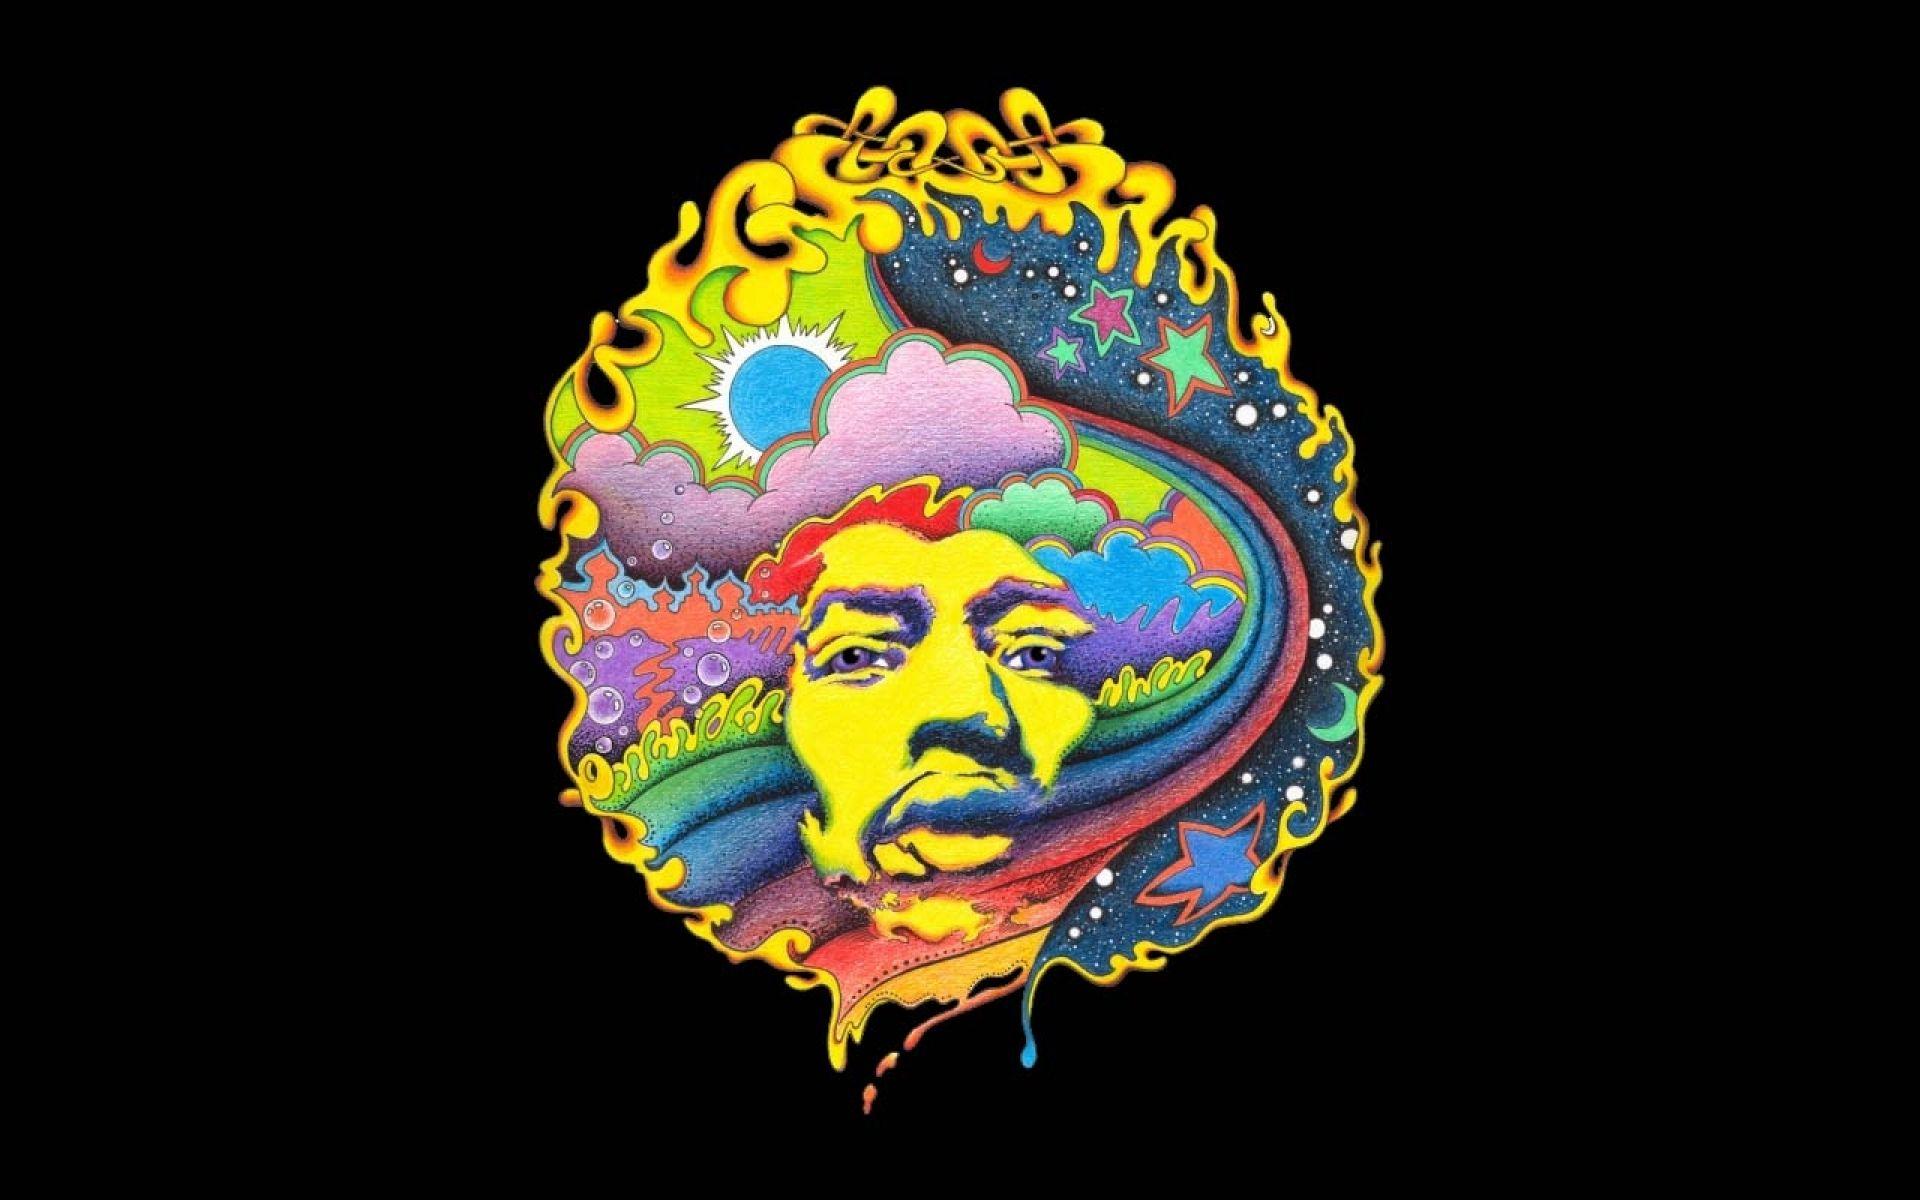 Jimi Hendrix Wallpaper High Resolution and Quality Download